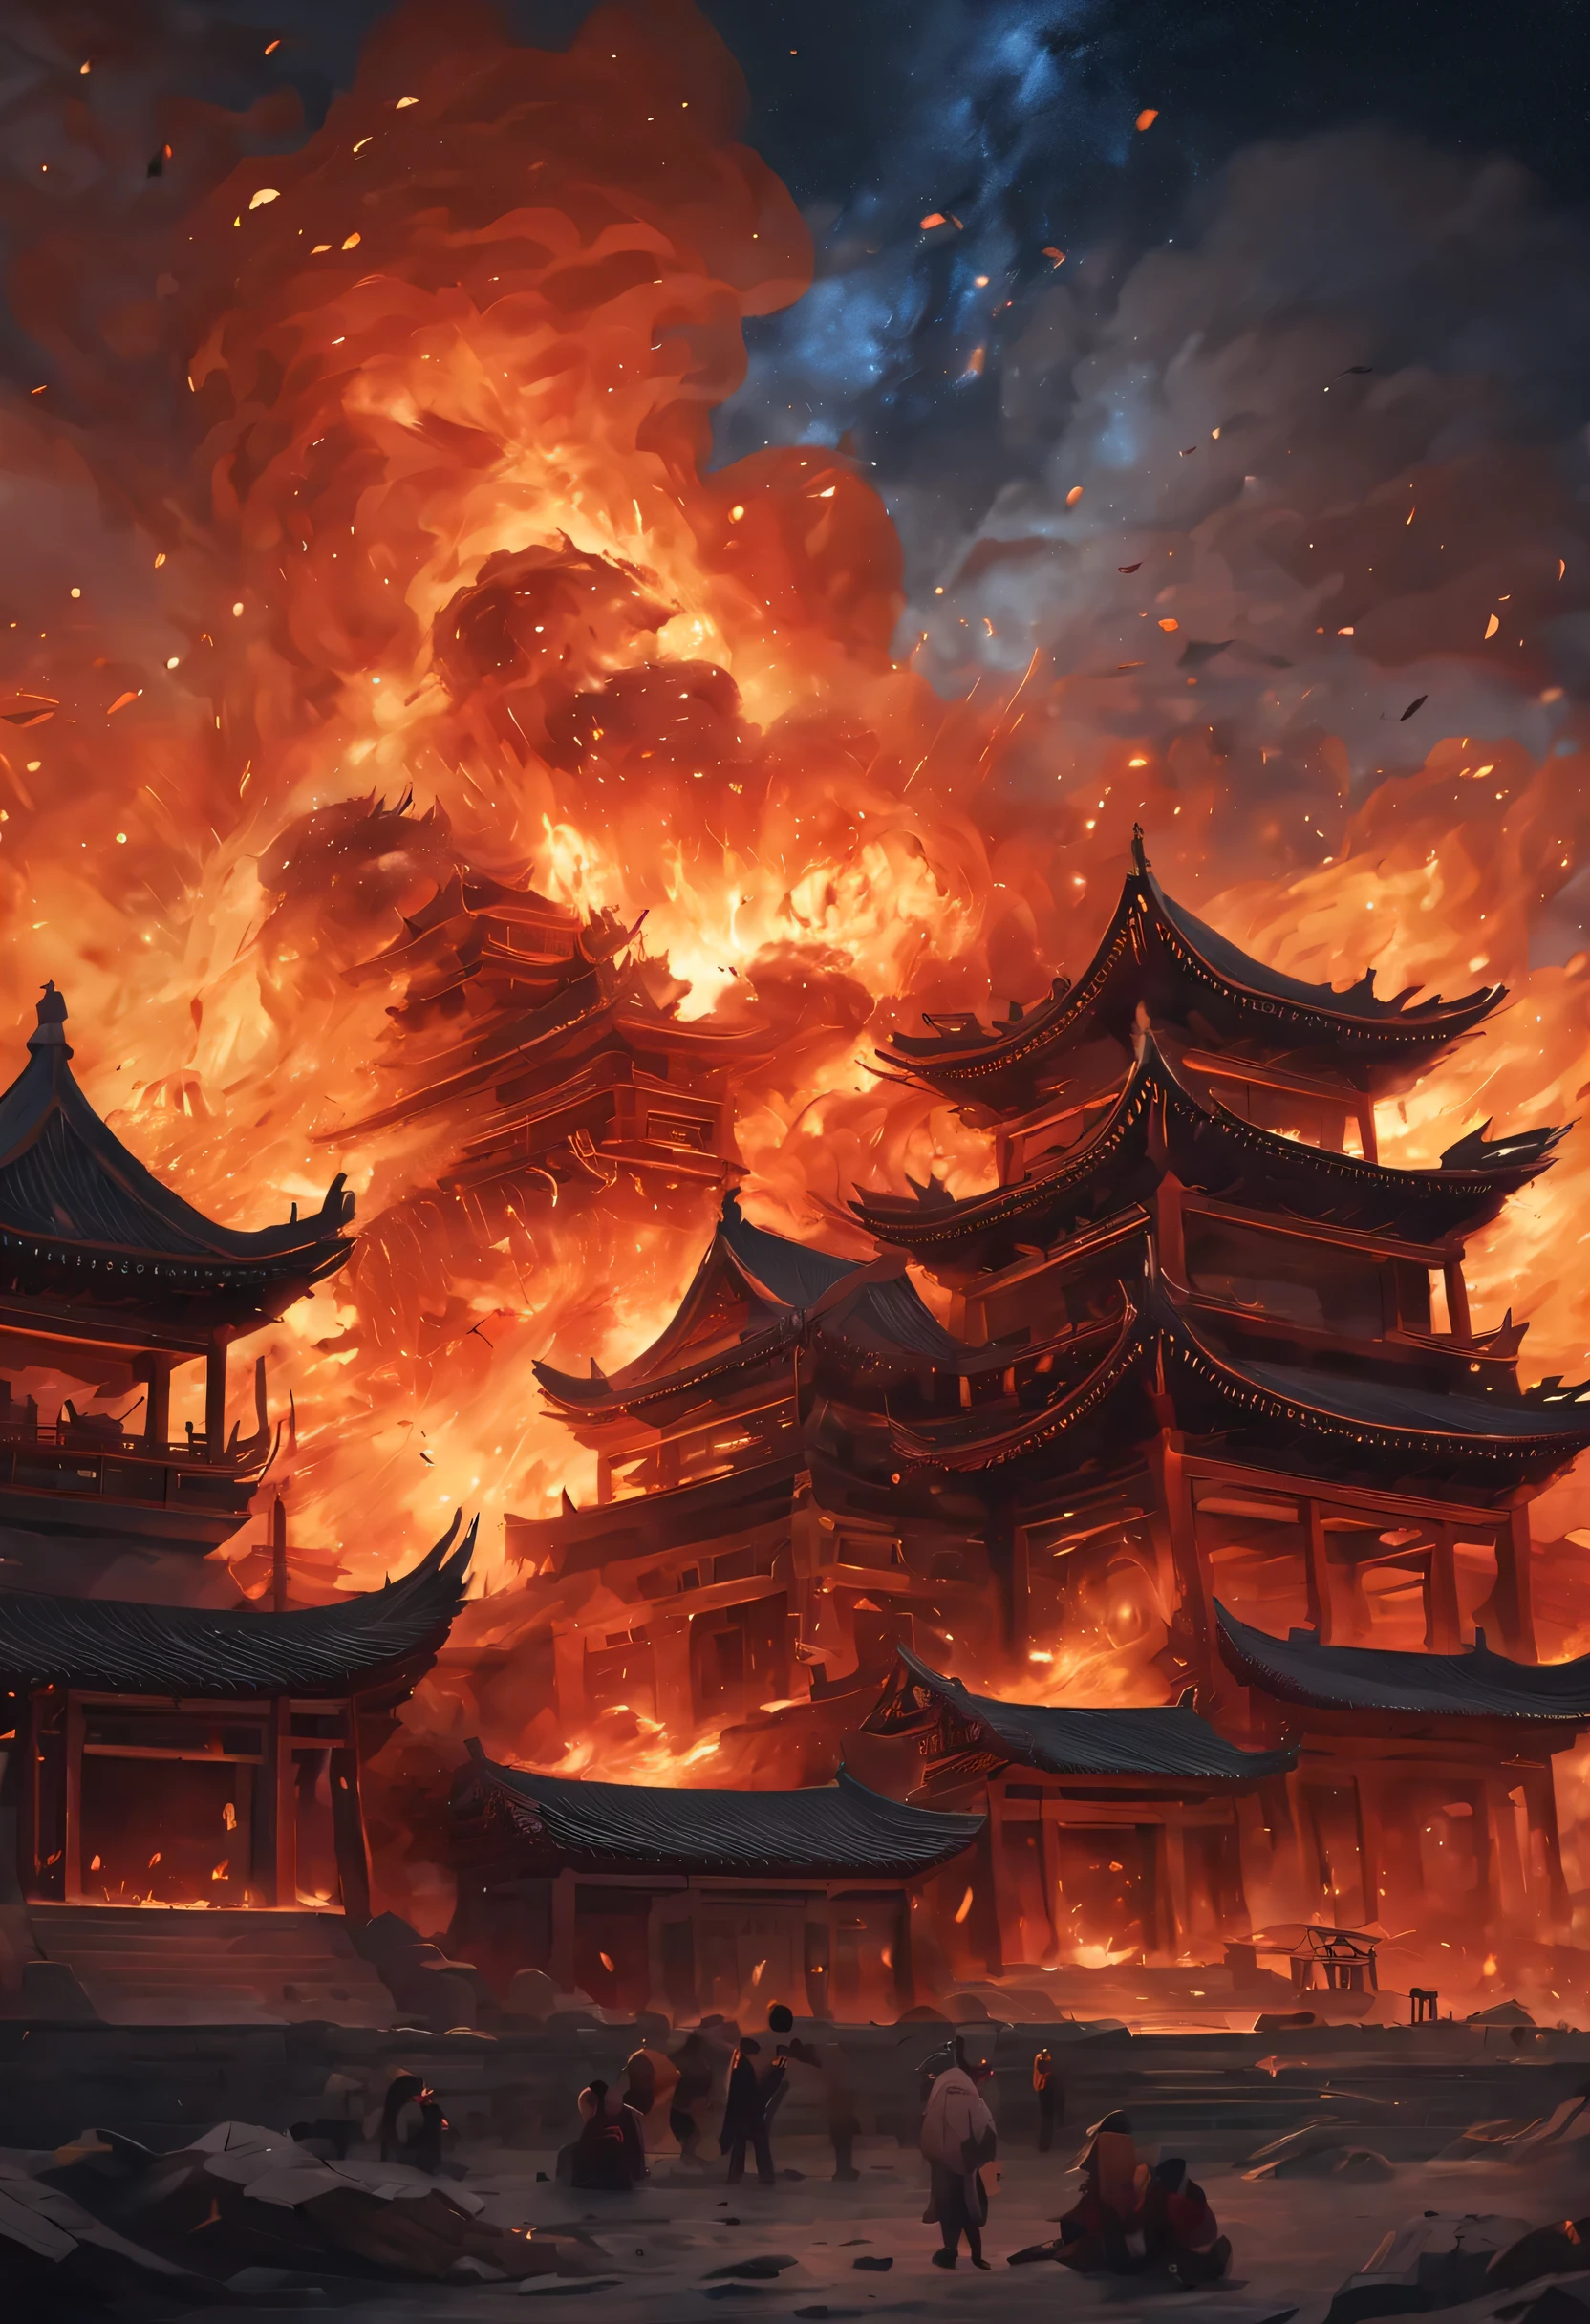 night sky，night，fire，fire海，烈fire，Burning ancient Chinese buildings，capital city，ancient city，collapse，ruins，（汉服红衣女子奔向fire中），explode，burst，ethnic style，Chinese elements，